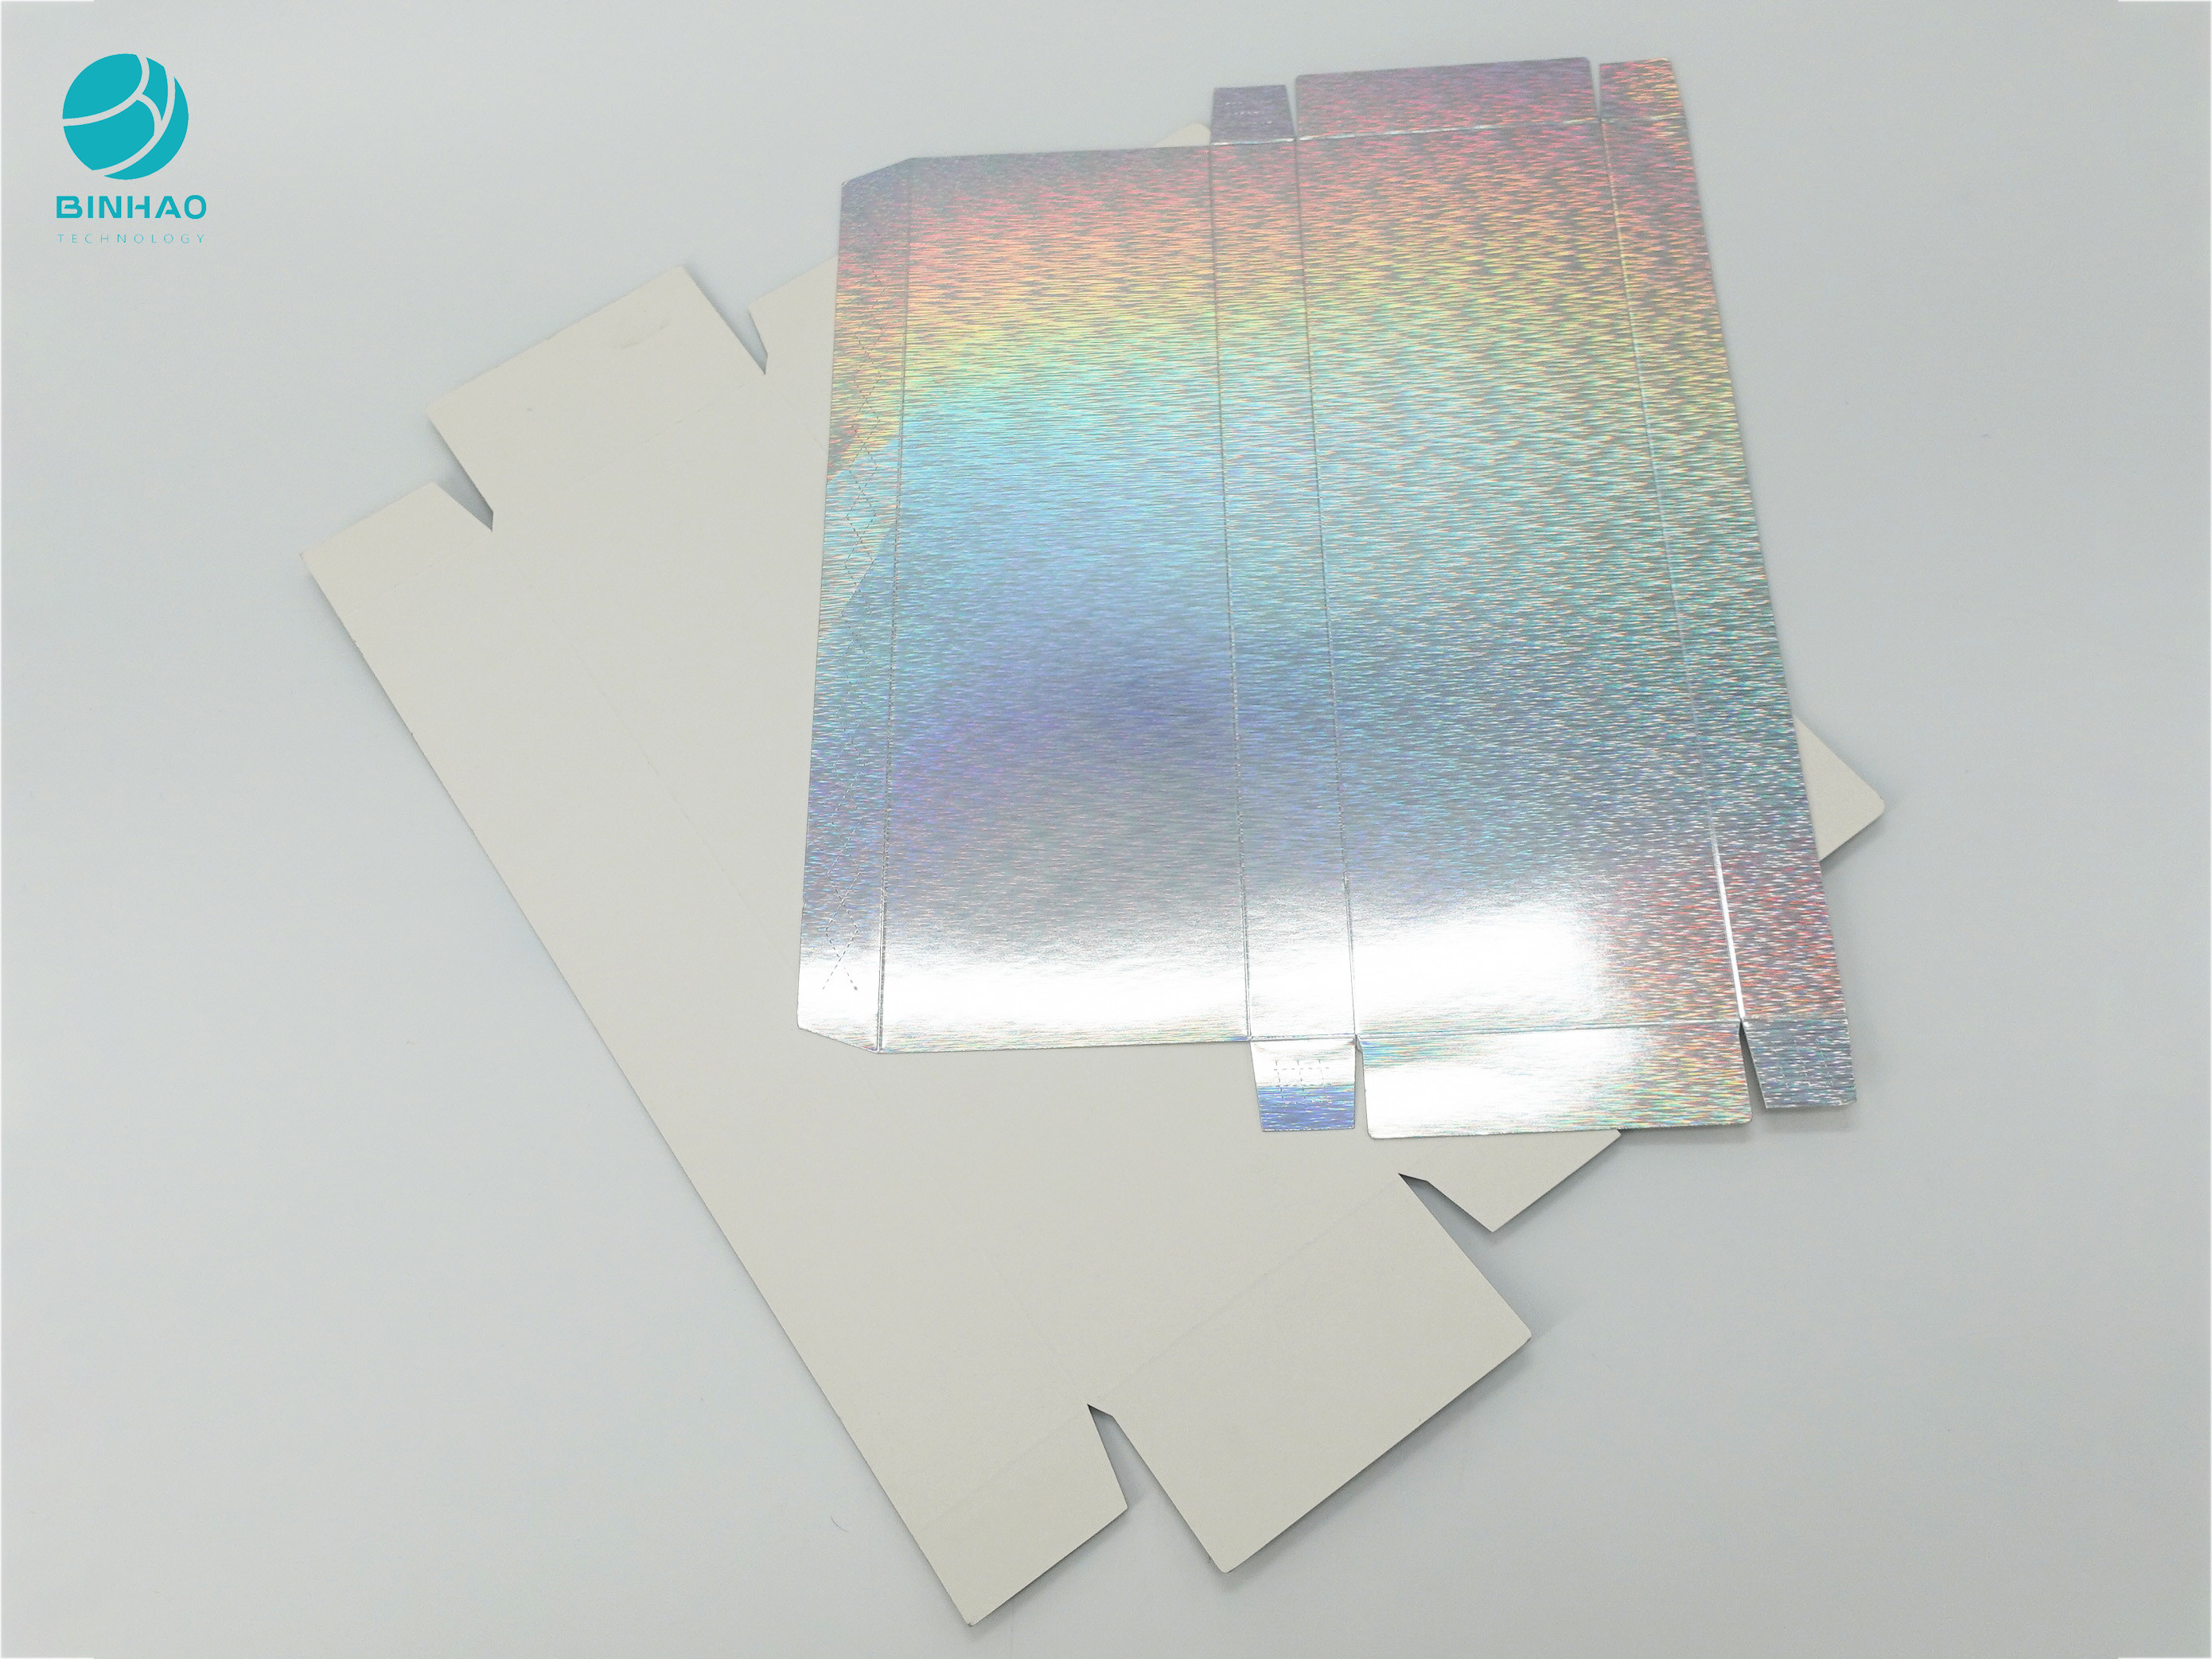 Holographic Decorative box Cardboard Cases For Tobacco Cigarette Packaging